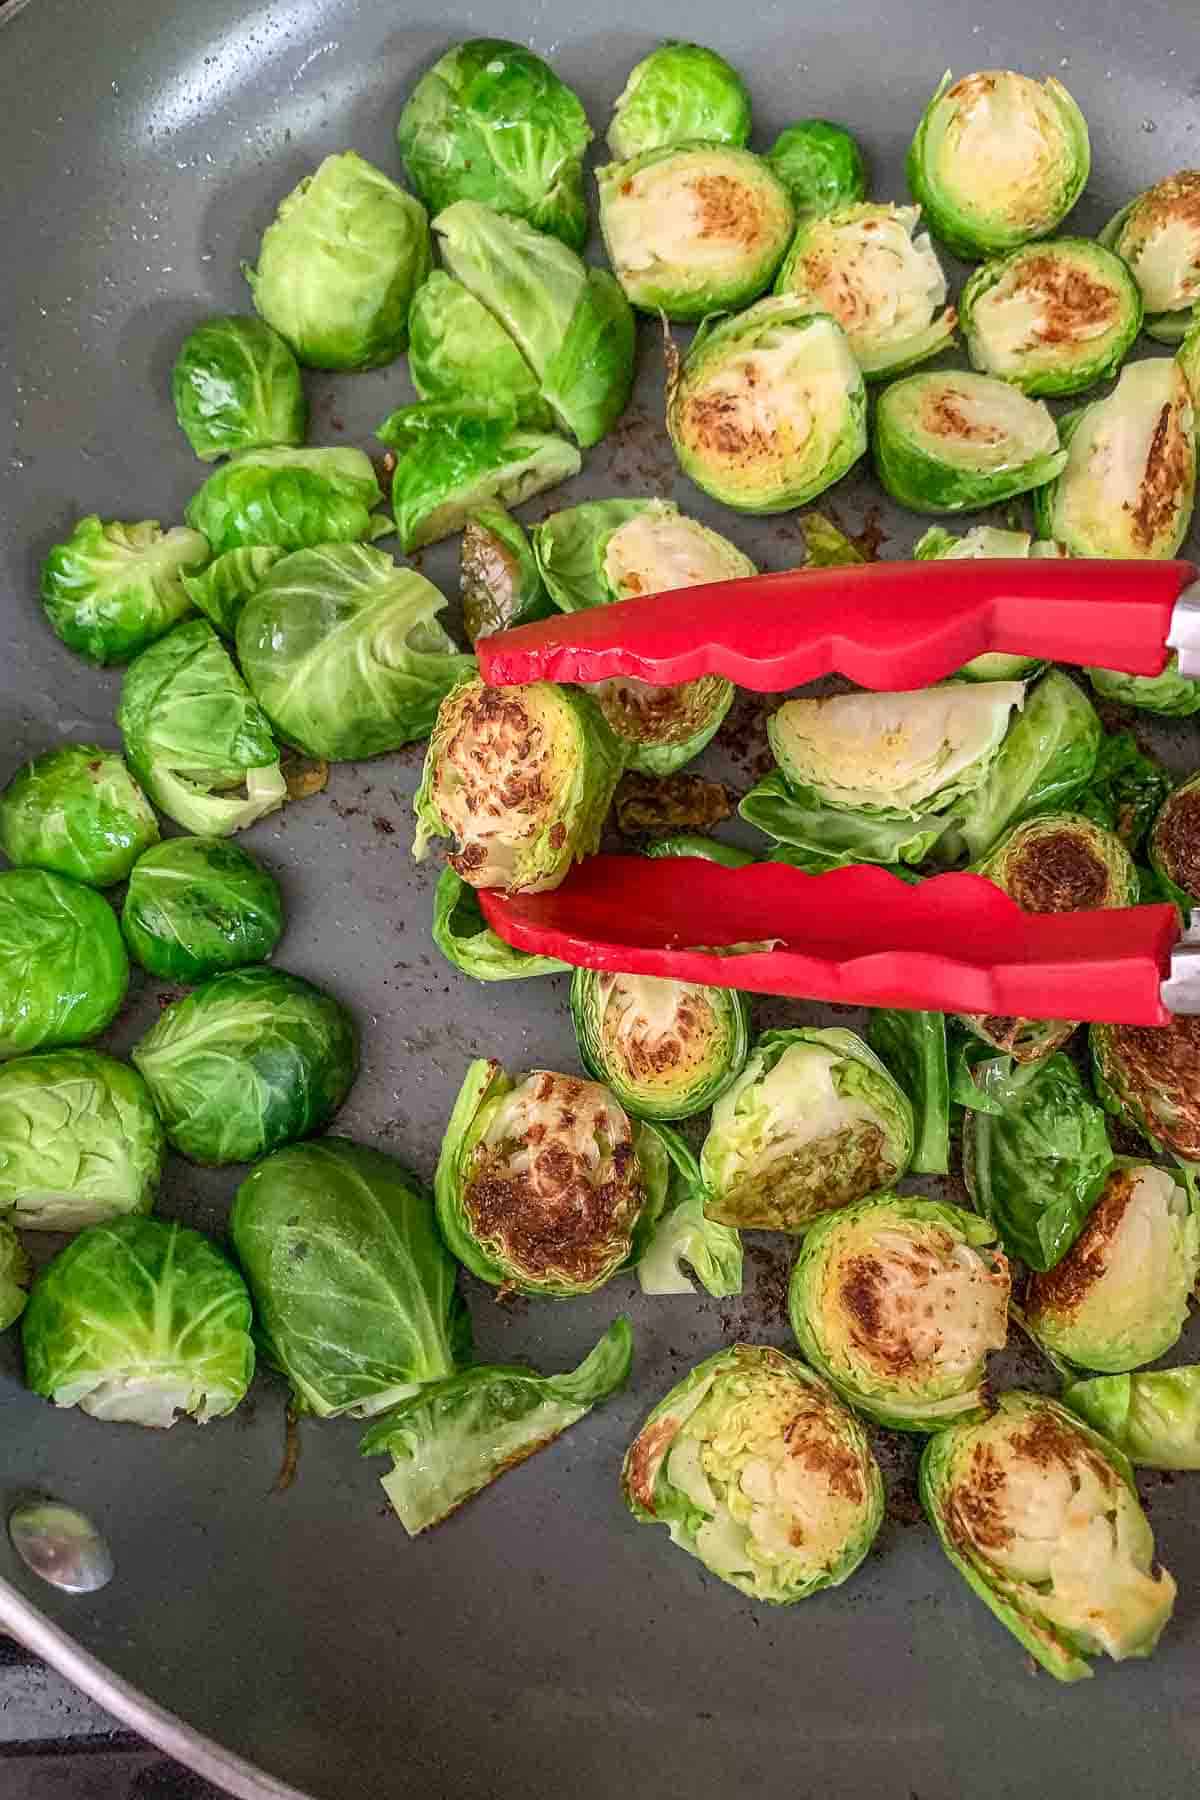 cooking brussels sprouts in saute pan